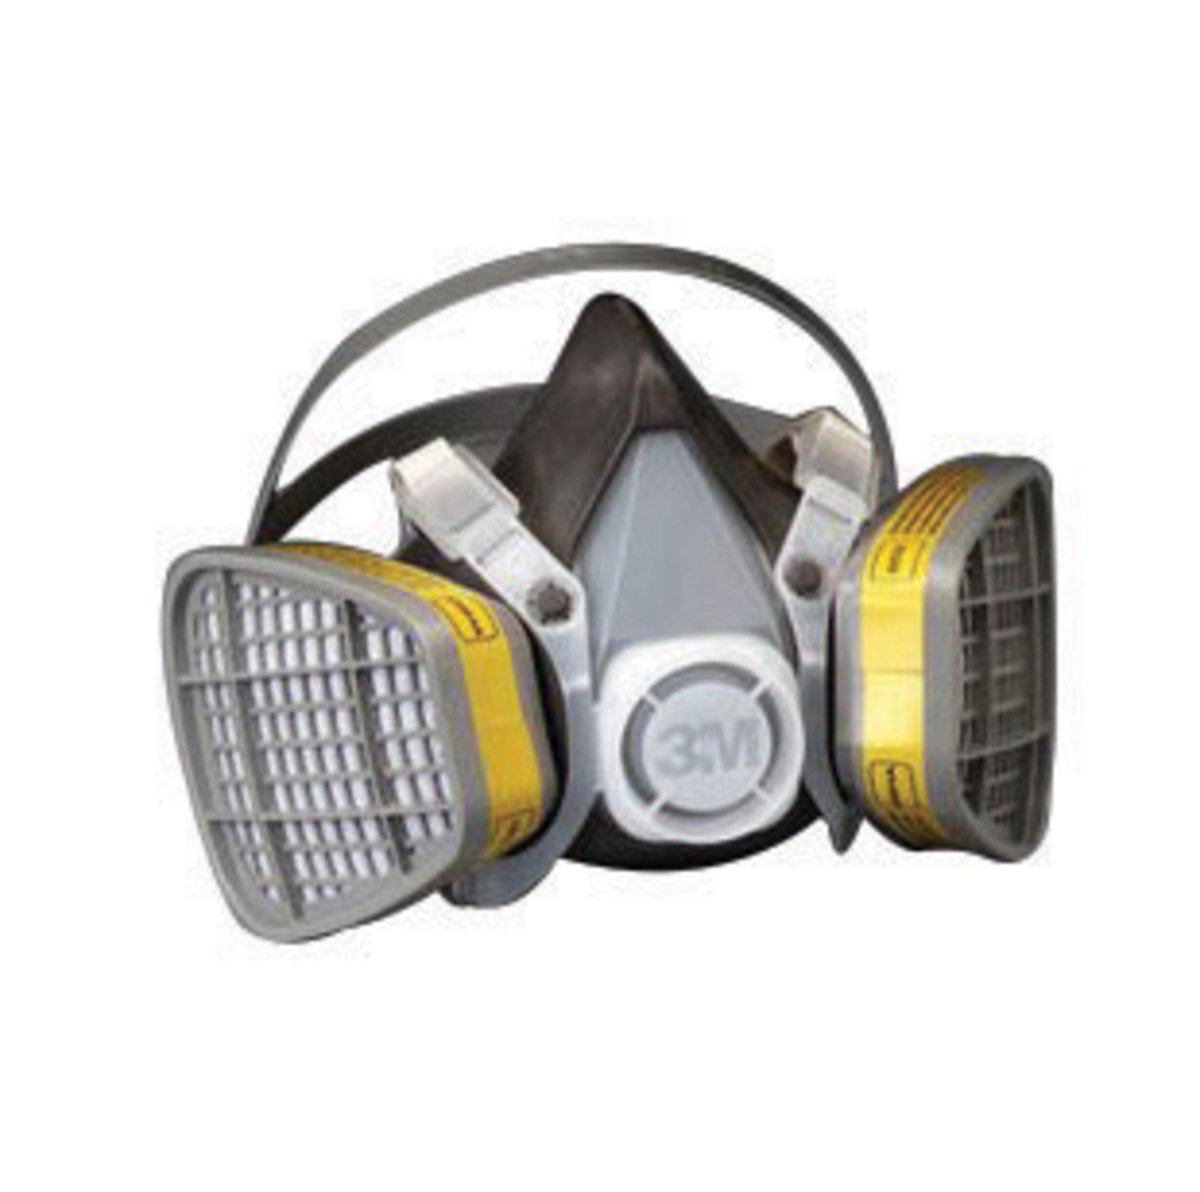 3M™ Large 5000 Series Half Face Disposable Air Purifying Respirator (Availability restrictions apply.)